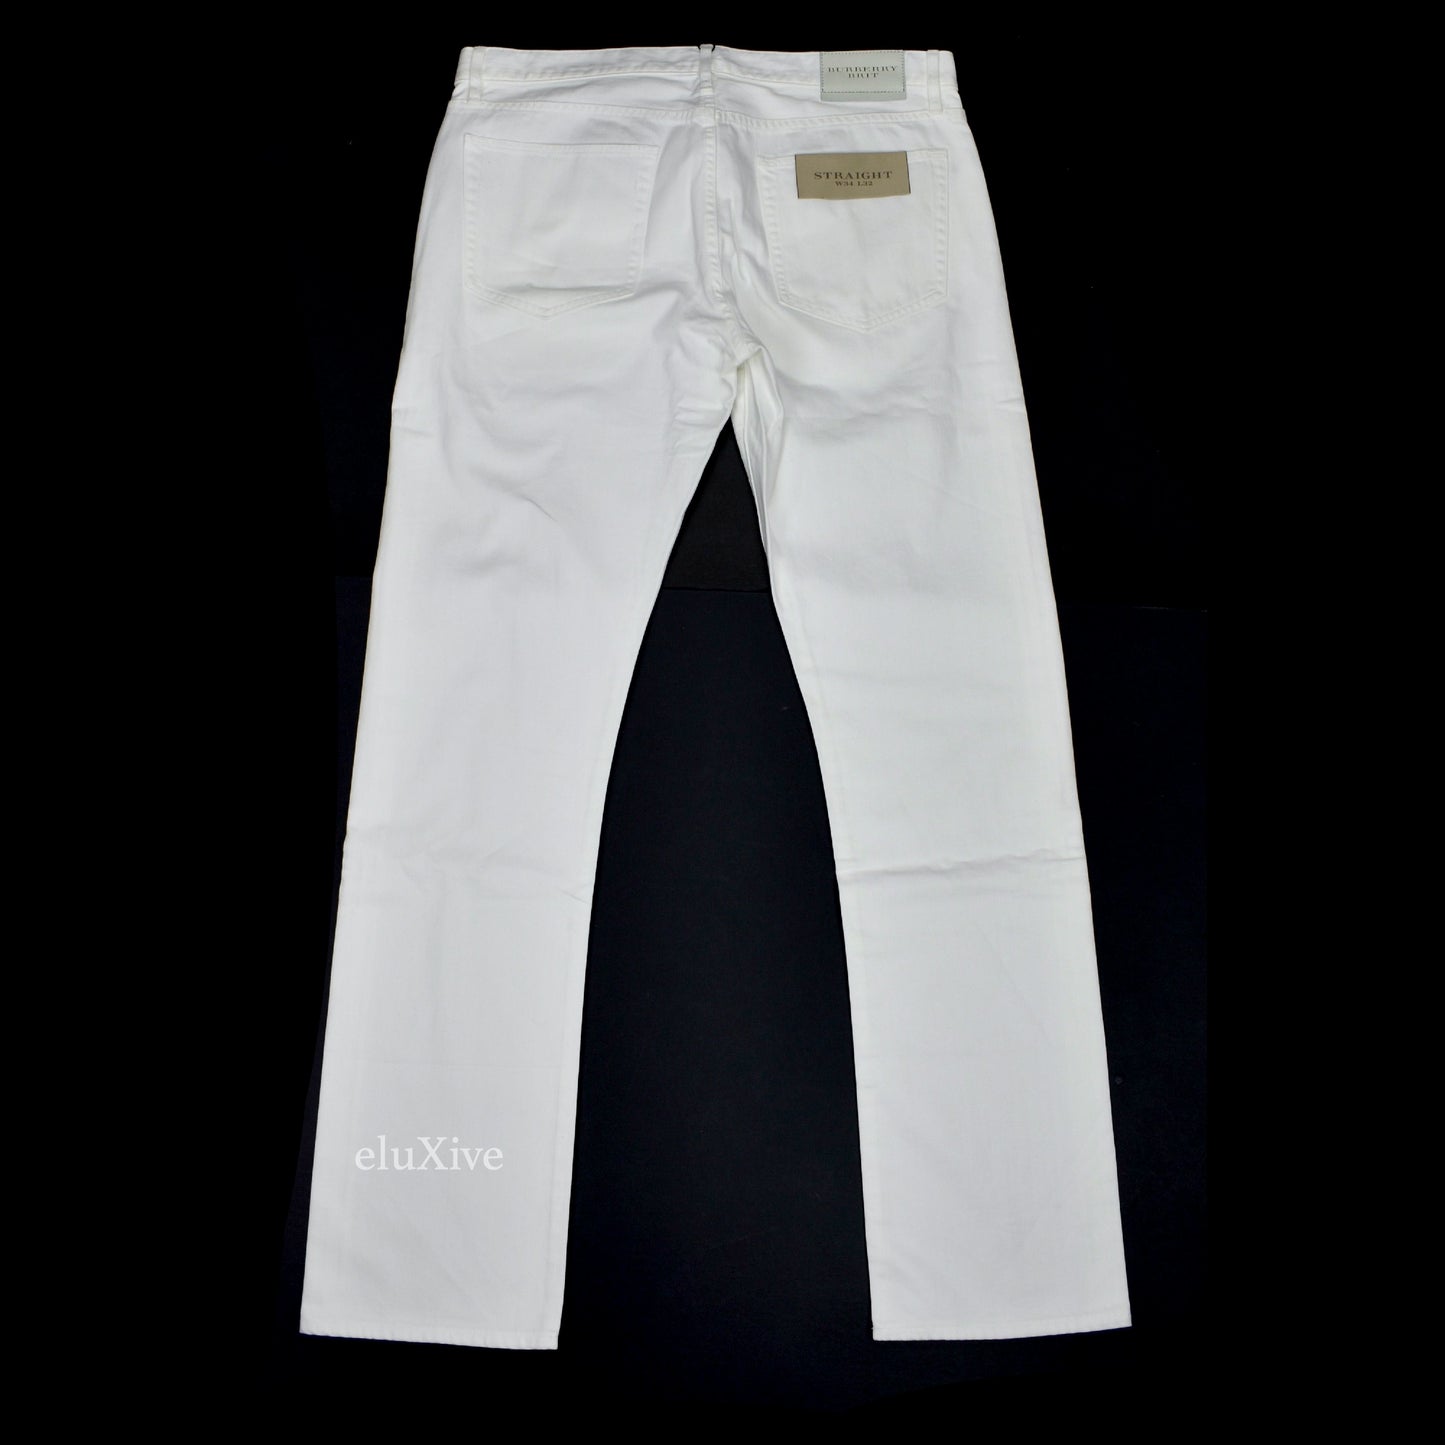 Burberry - White Straight Fit Denim Jeans